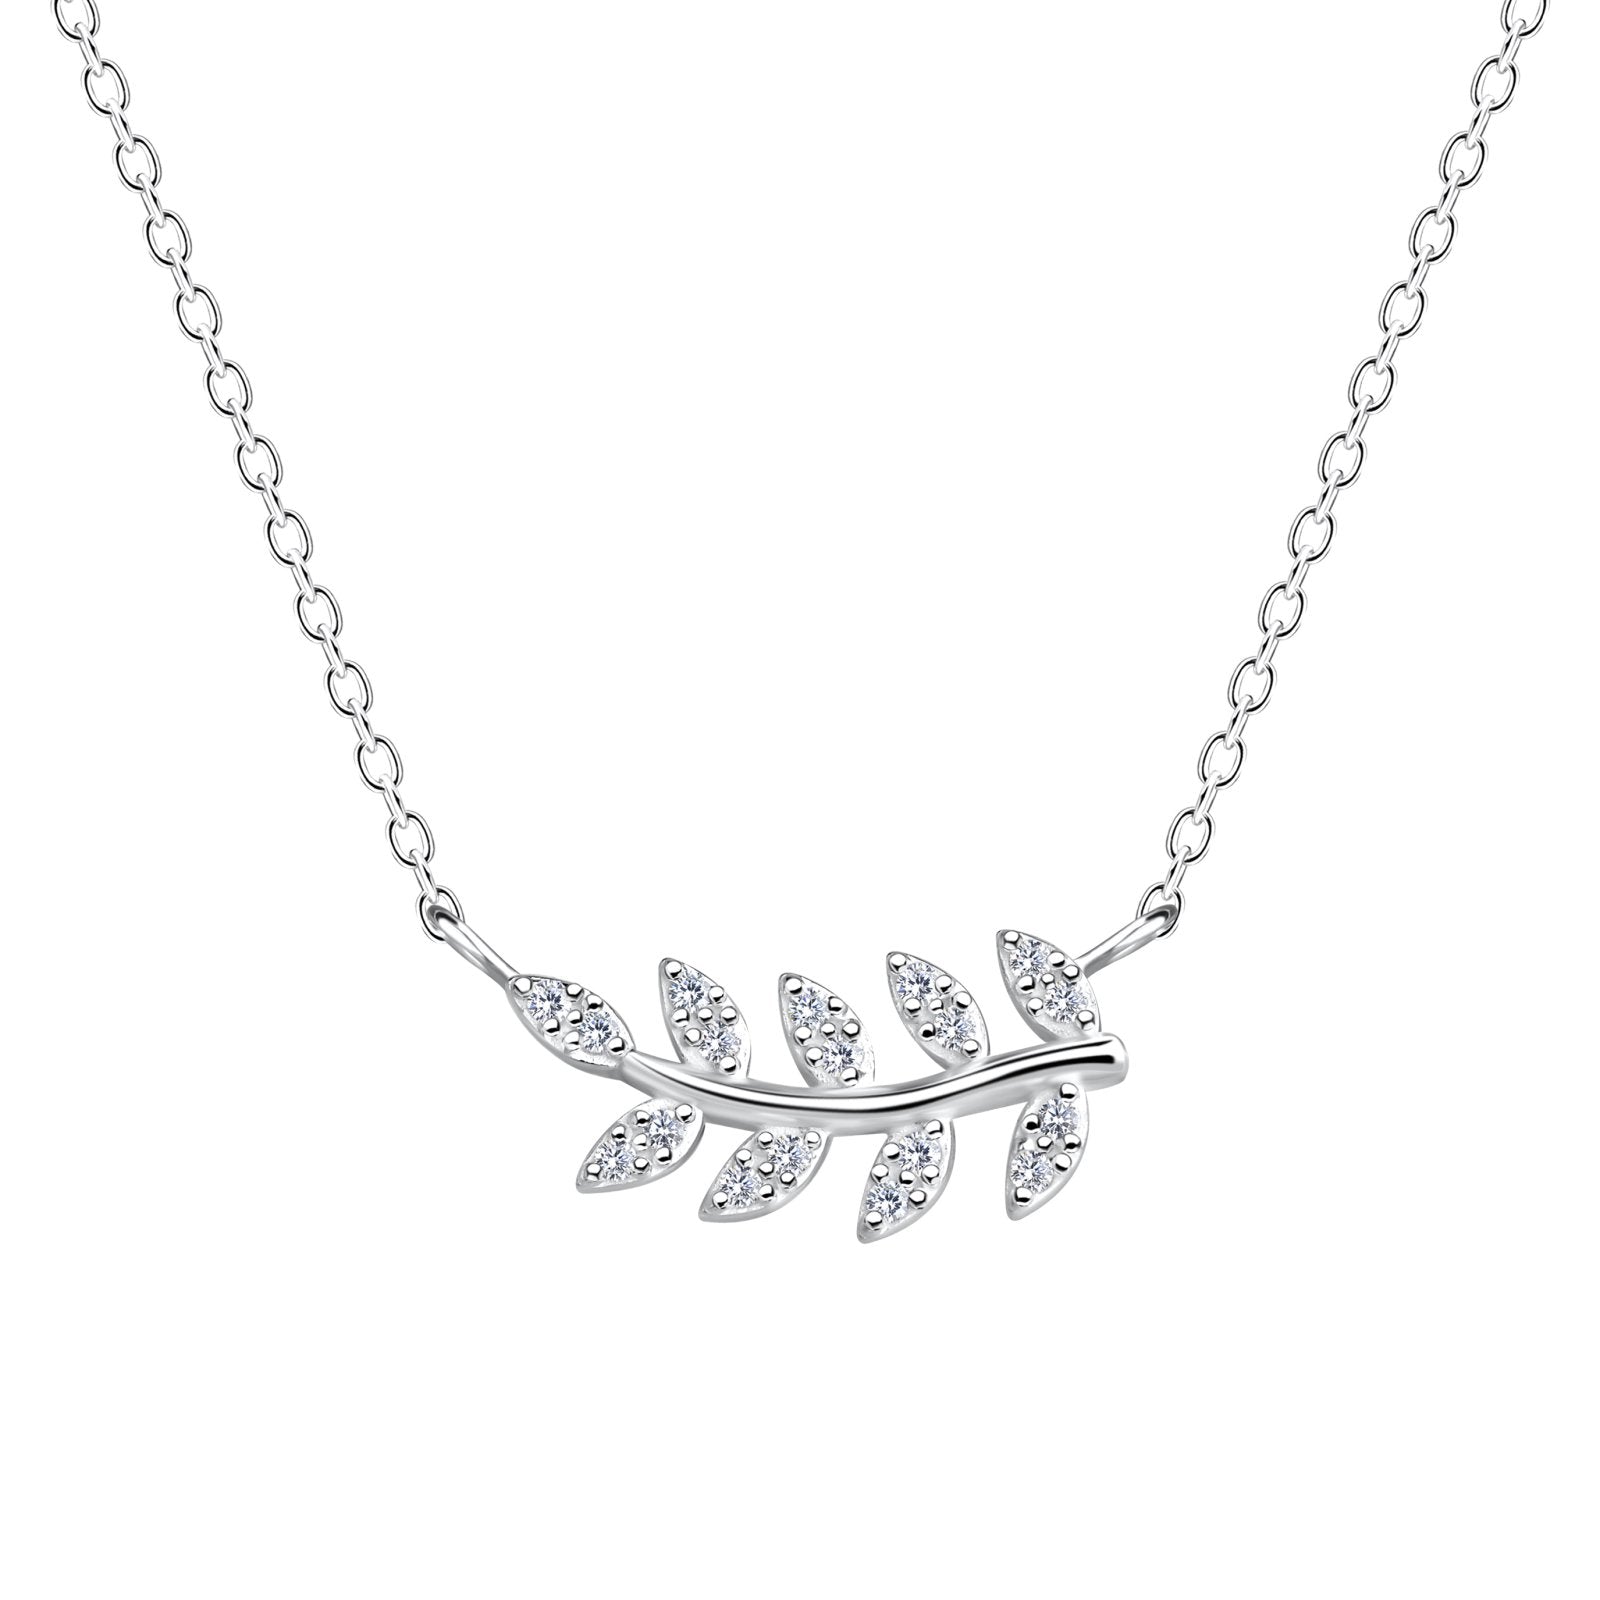 Silver Olive Leaf Necklace setting with Cubic Zirconia